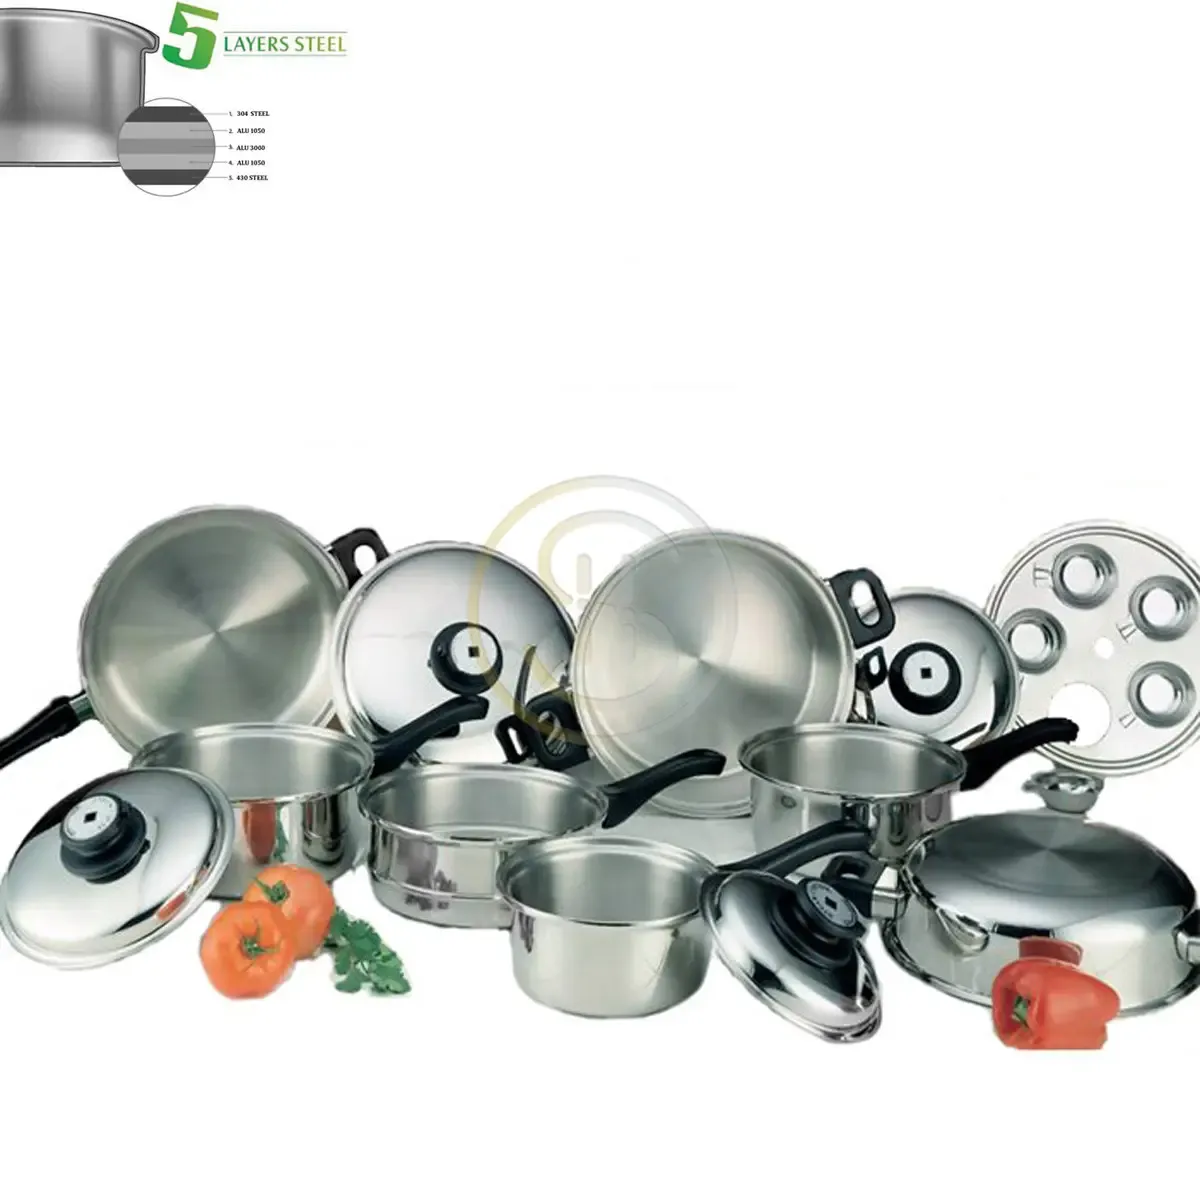 5Ply All Clad Steel 17pcs Rolled Edge Cookware Set